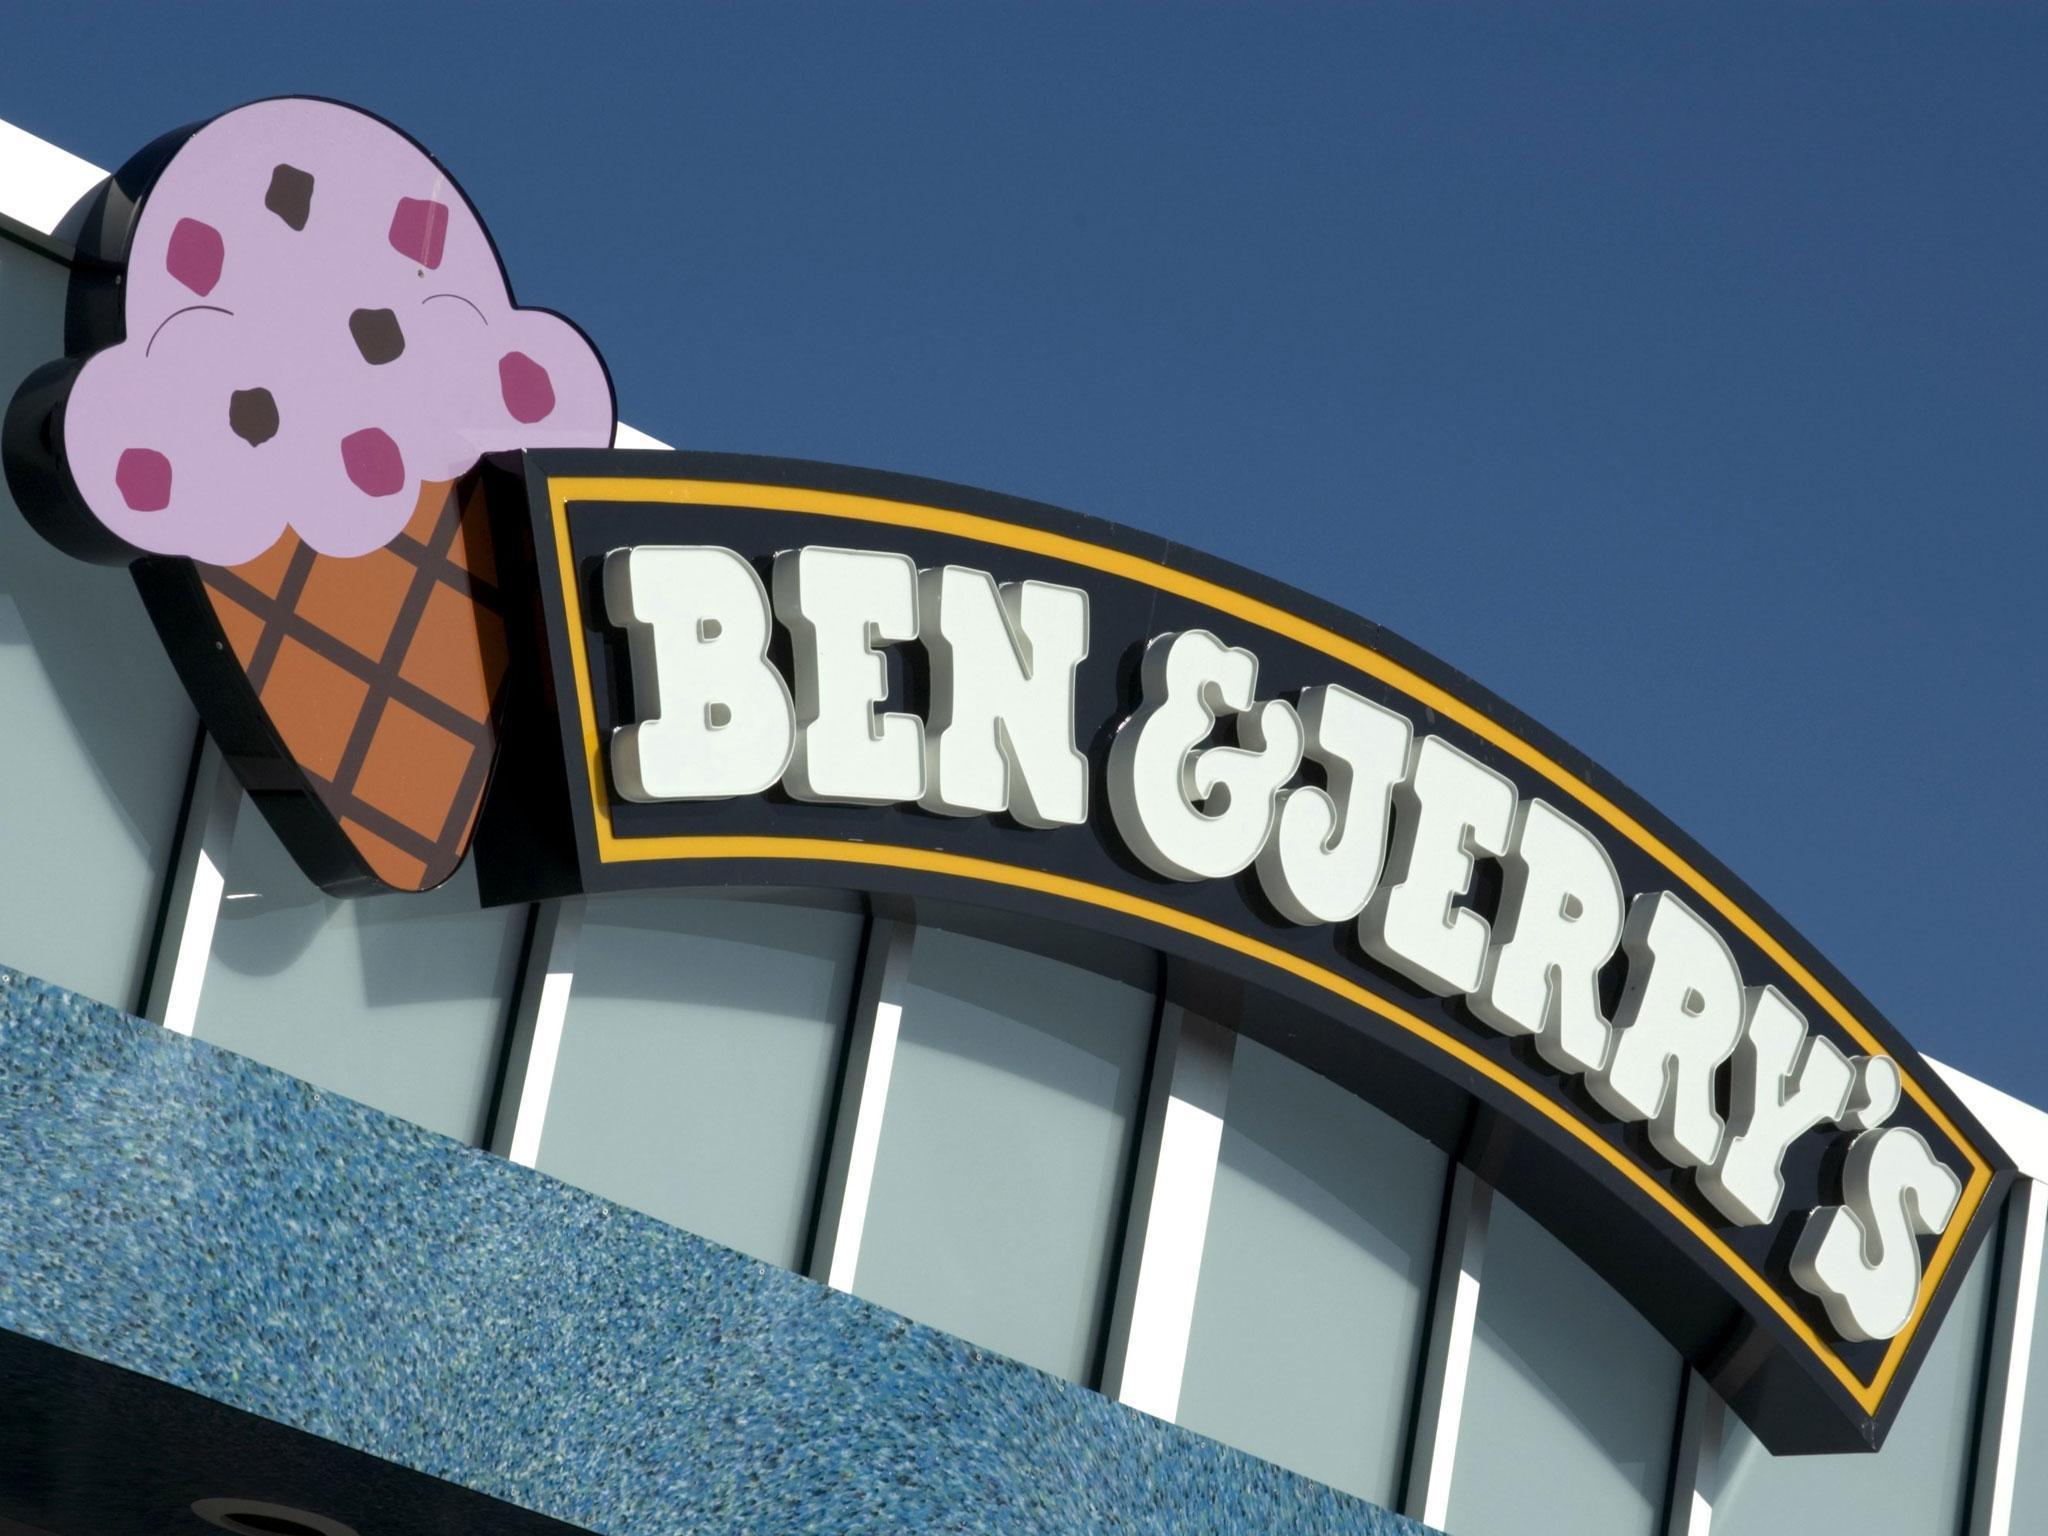 Keeping it afloat: Unilever blamed bad weather for poor sales of ice cream, though Ben & Jerry's sells well all-year round